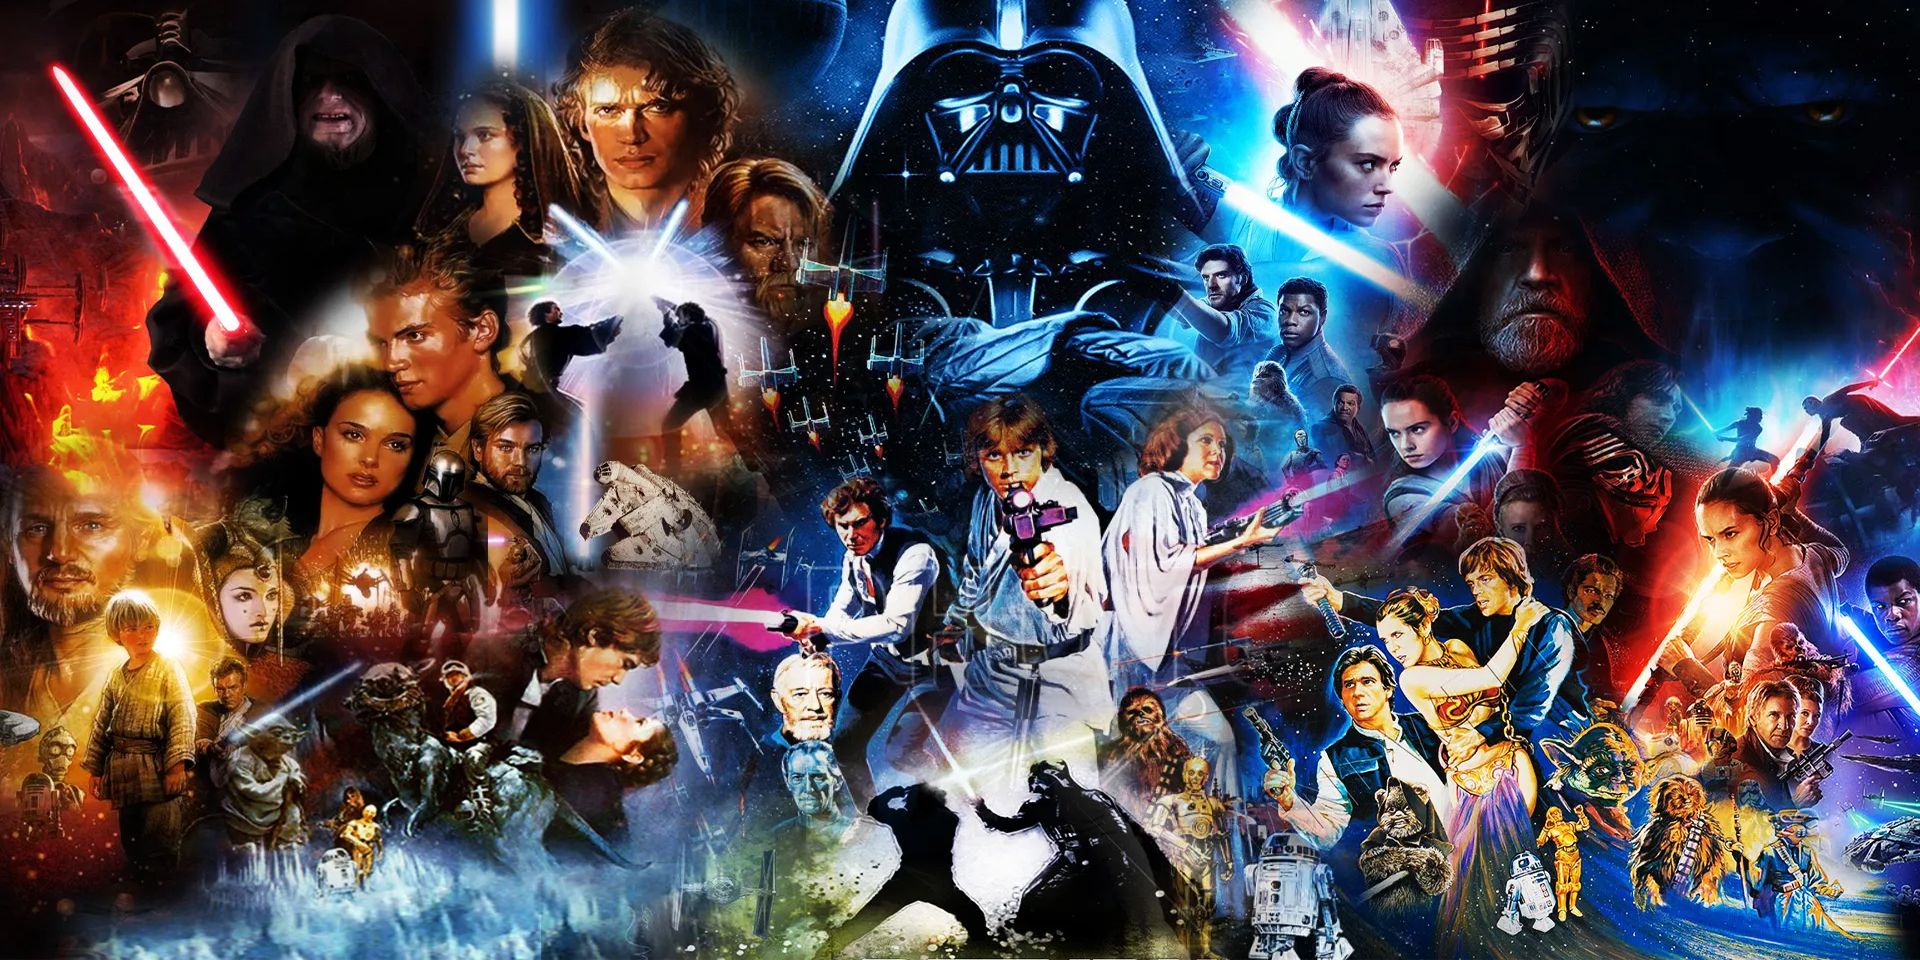 All the 'Star Wars' movies and shows in chronological order